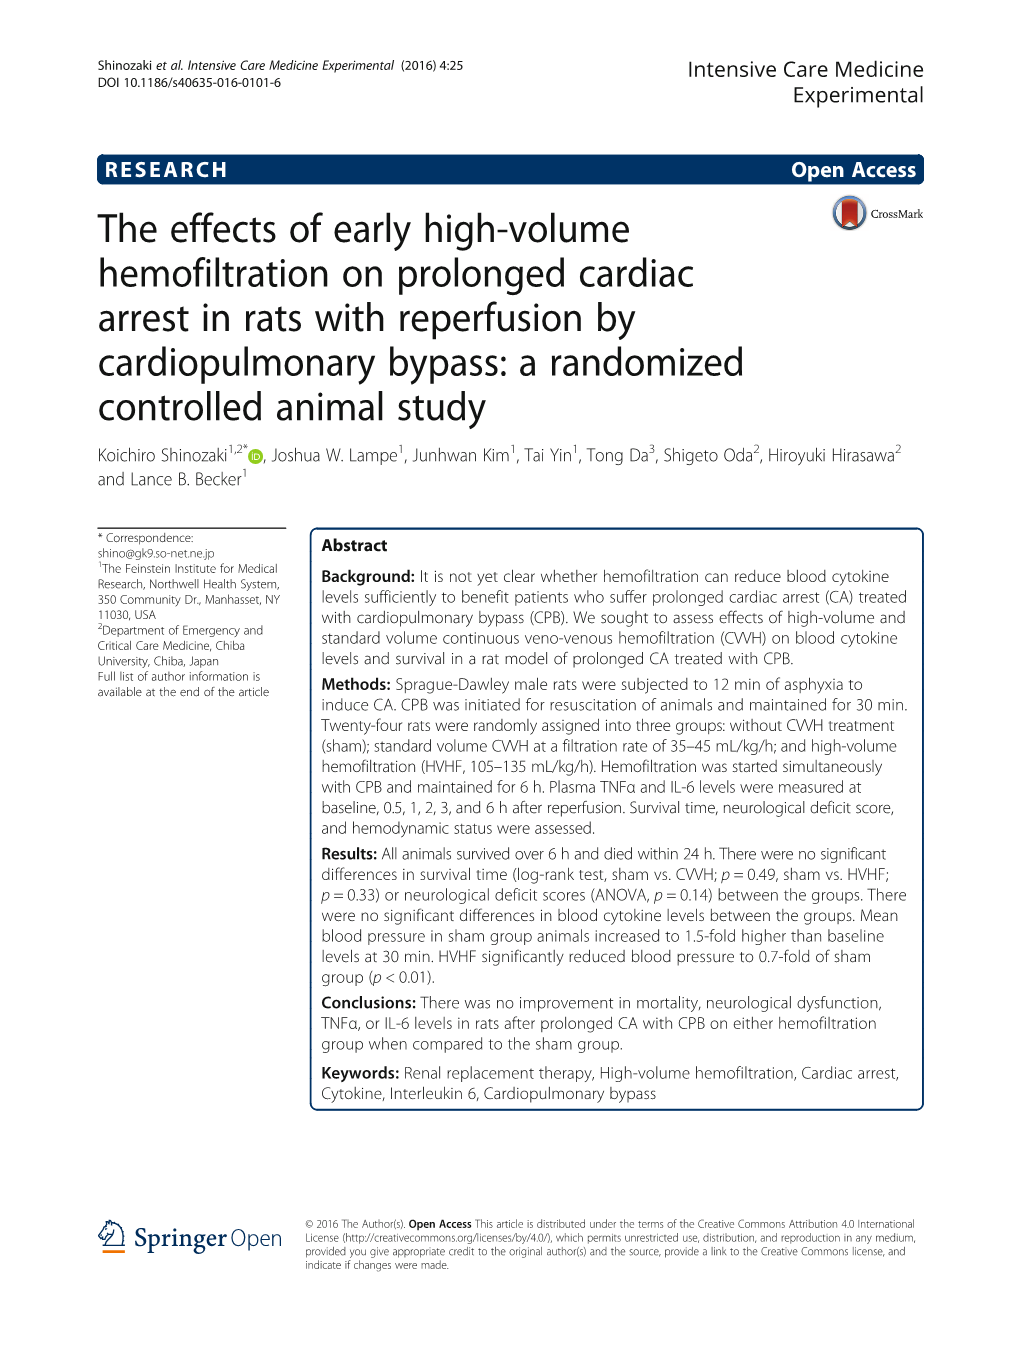 The Effects of Early High-Volume Hemofiltration on Prolonged Cardiac